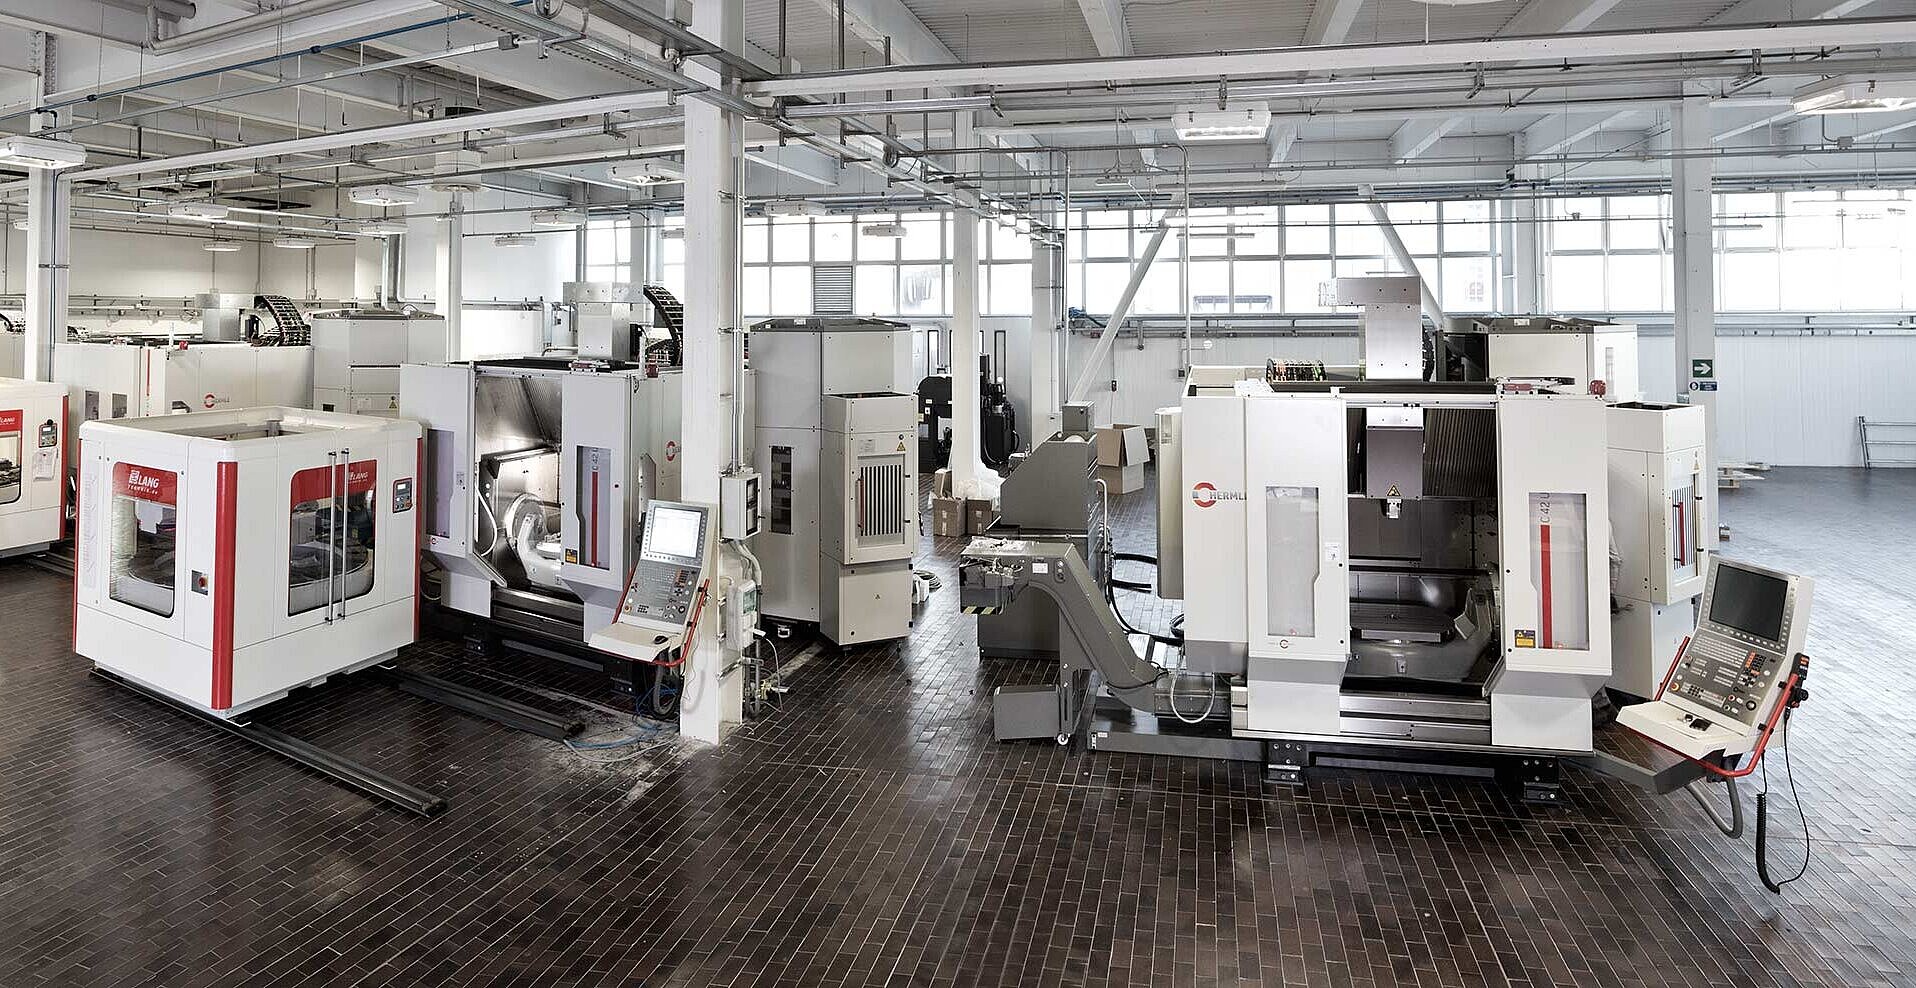 The three C 42 U five-axis machining centres already in operation on the left. The workpiece magazines on rails are in front of them, and on the right is the fourth C 42 U machining centre that is just being installed